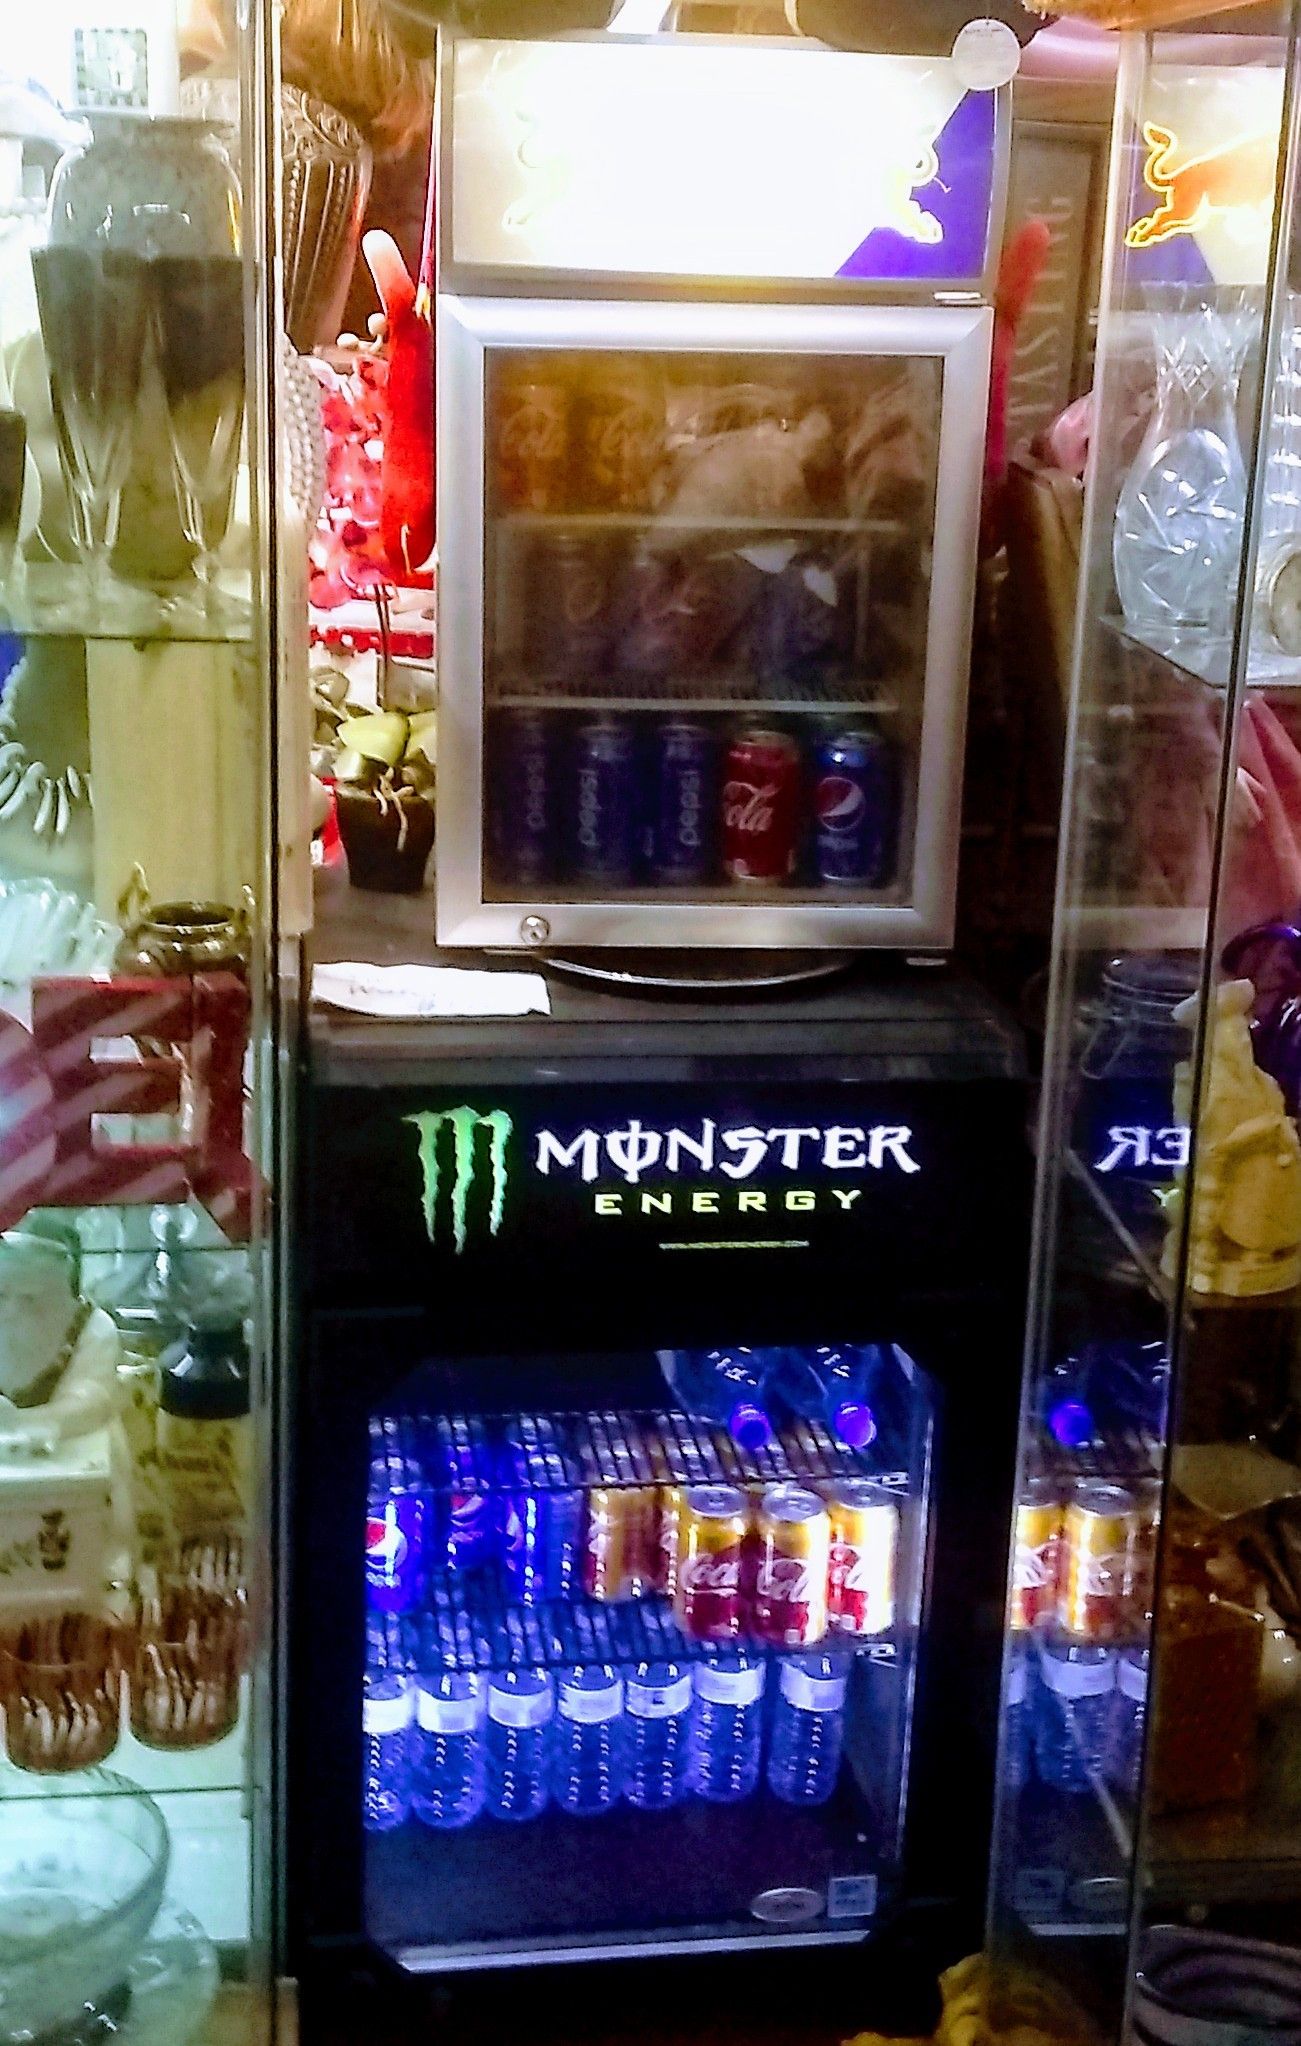 RED BULL AND MONSTER REFRIGERATOR YOUR CHOICE